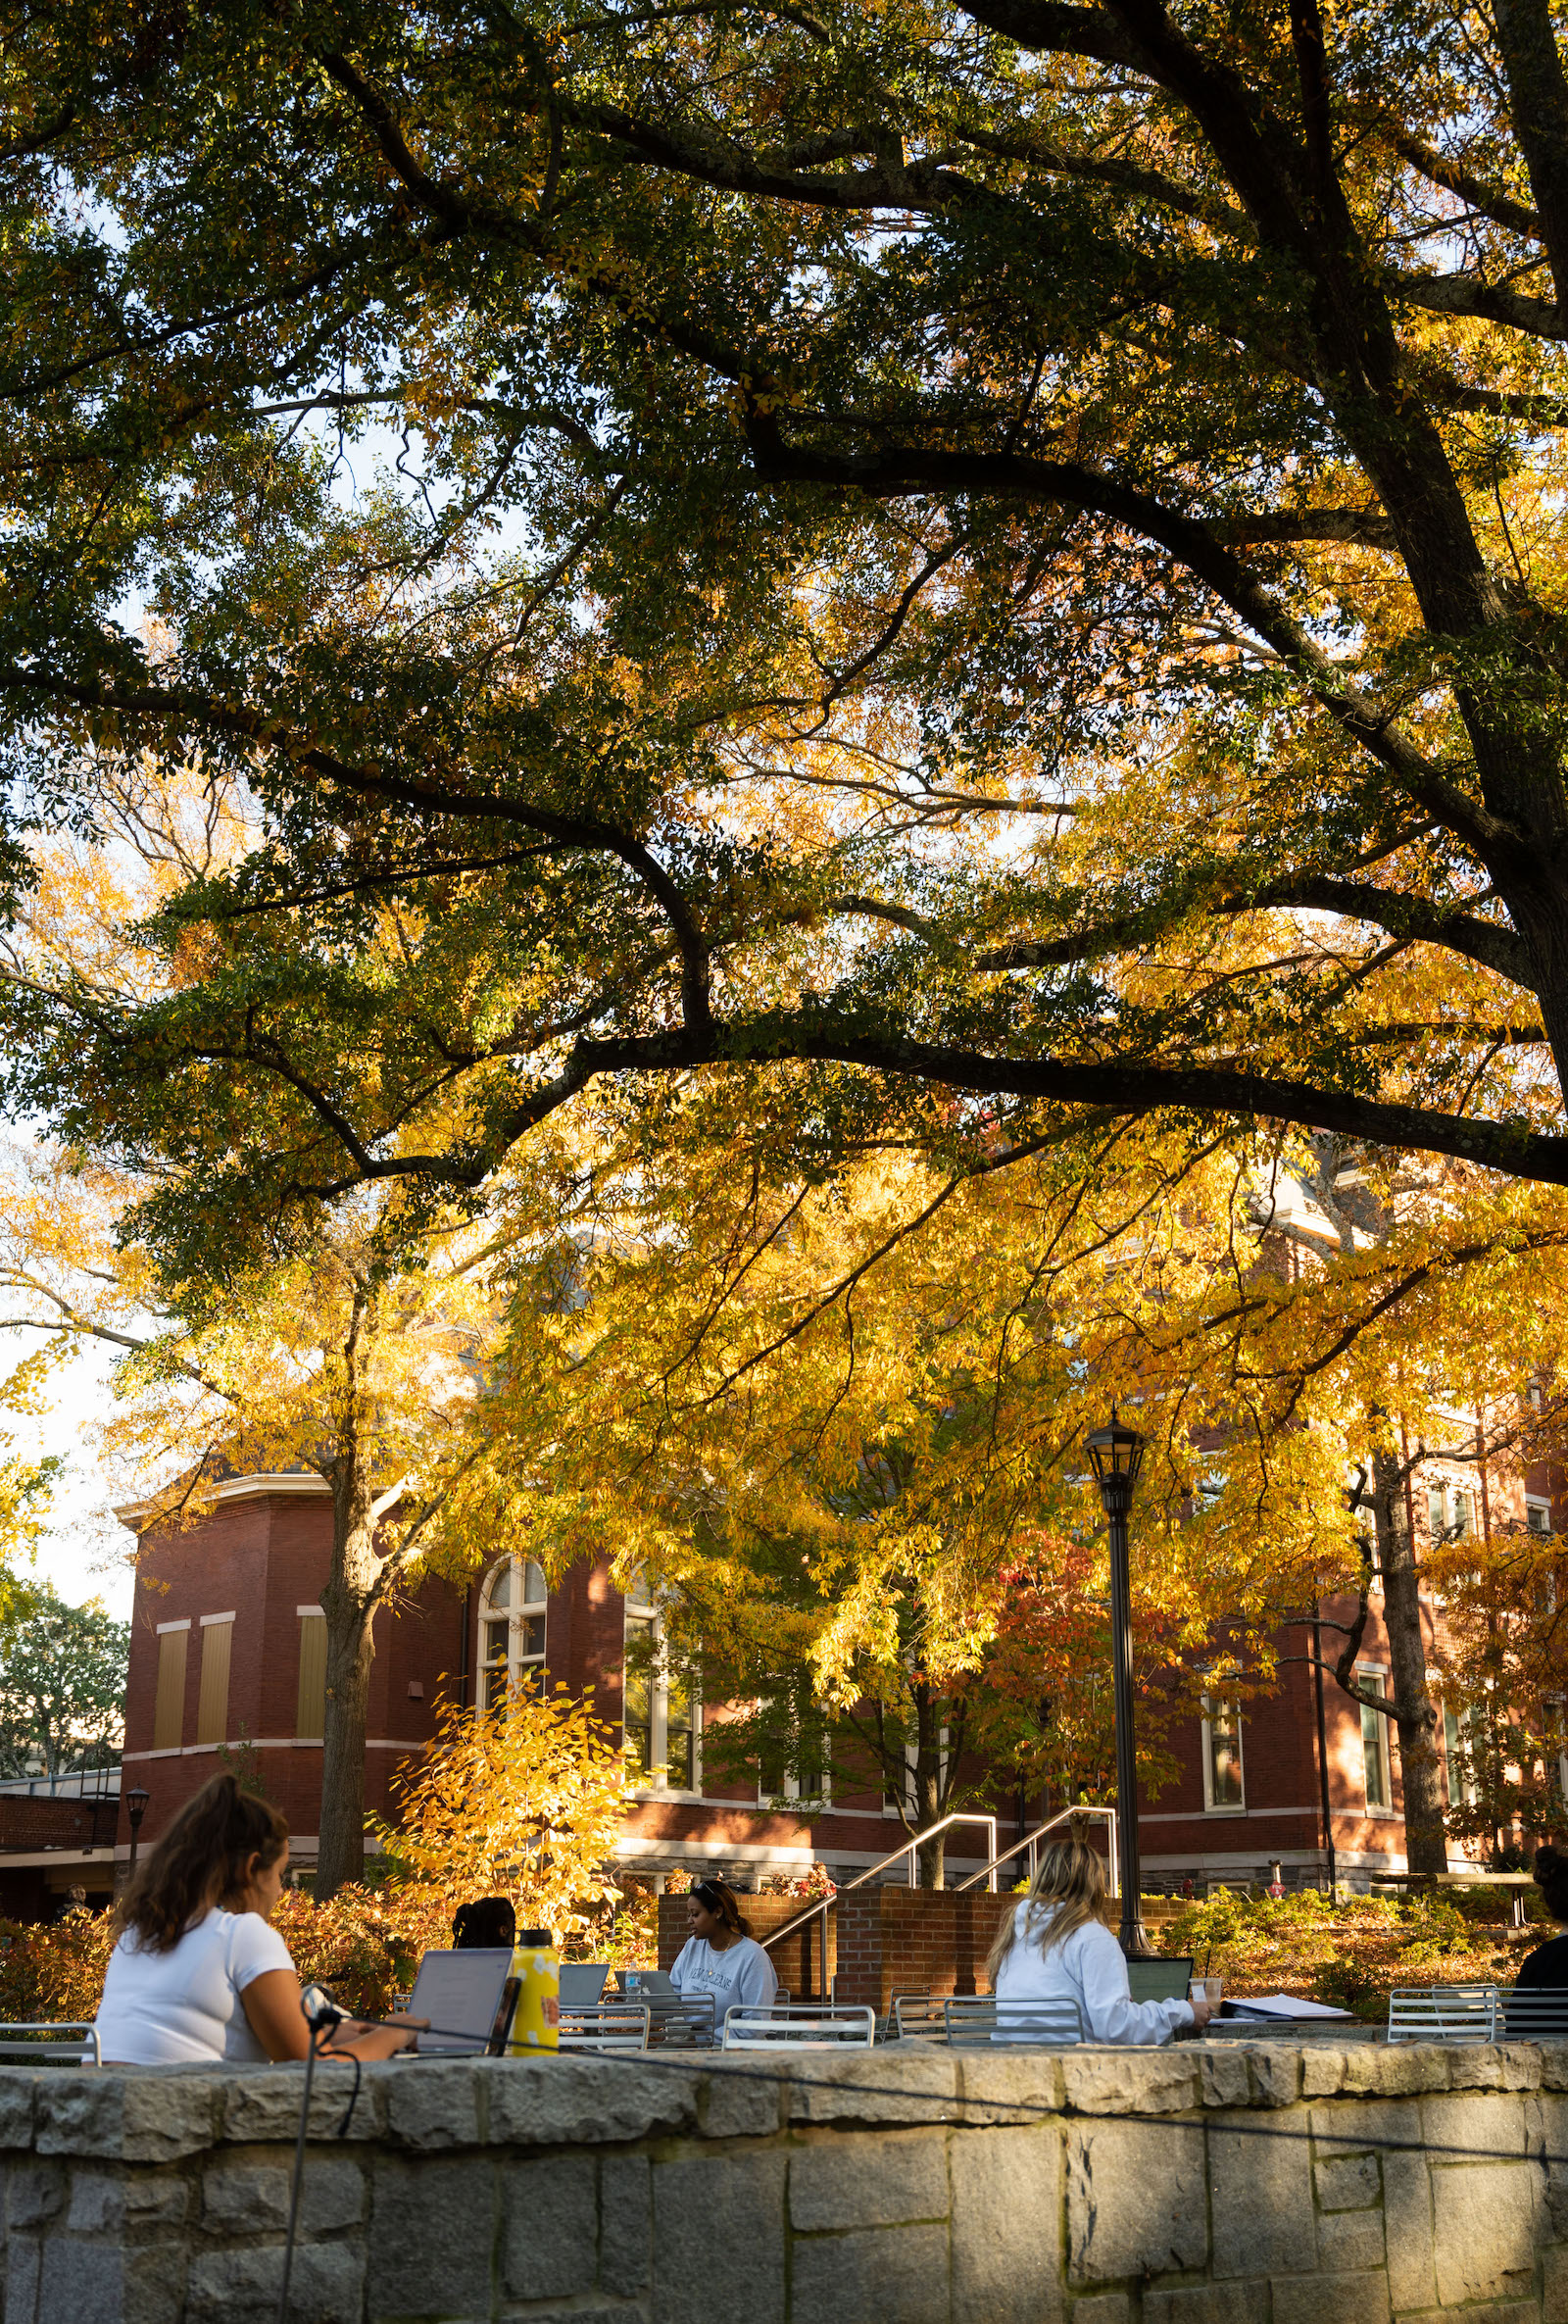 Students sitting in Harrison Square under fall foliage